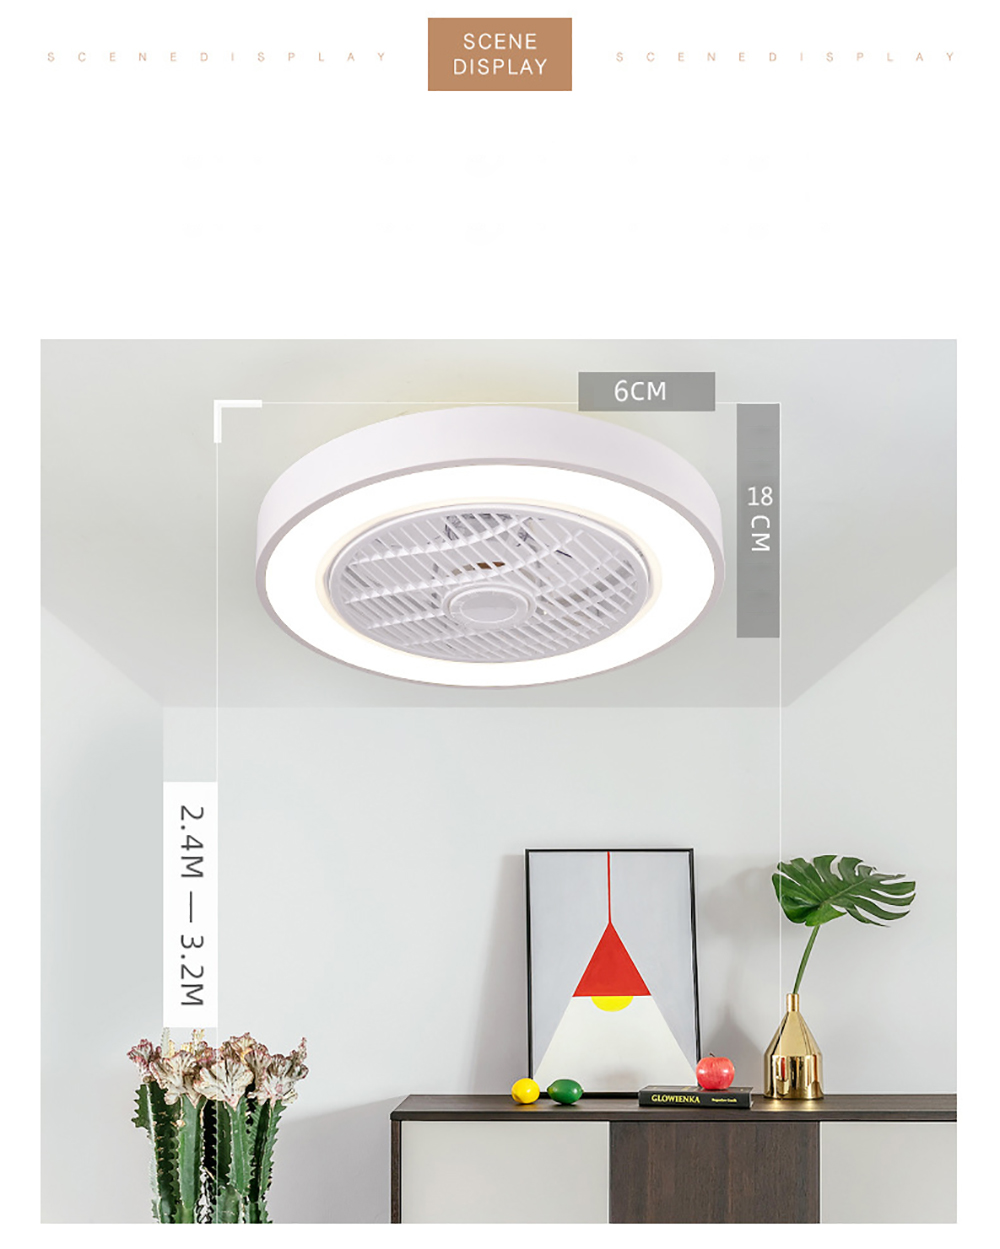 Smart-Ceiling-Fan-with-Remote-Control-Cell-Phone-Wi-Fi-Indoor-Home-Decor-Ceiling-Fan-with-Light-Mode-1680467-6